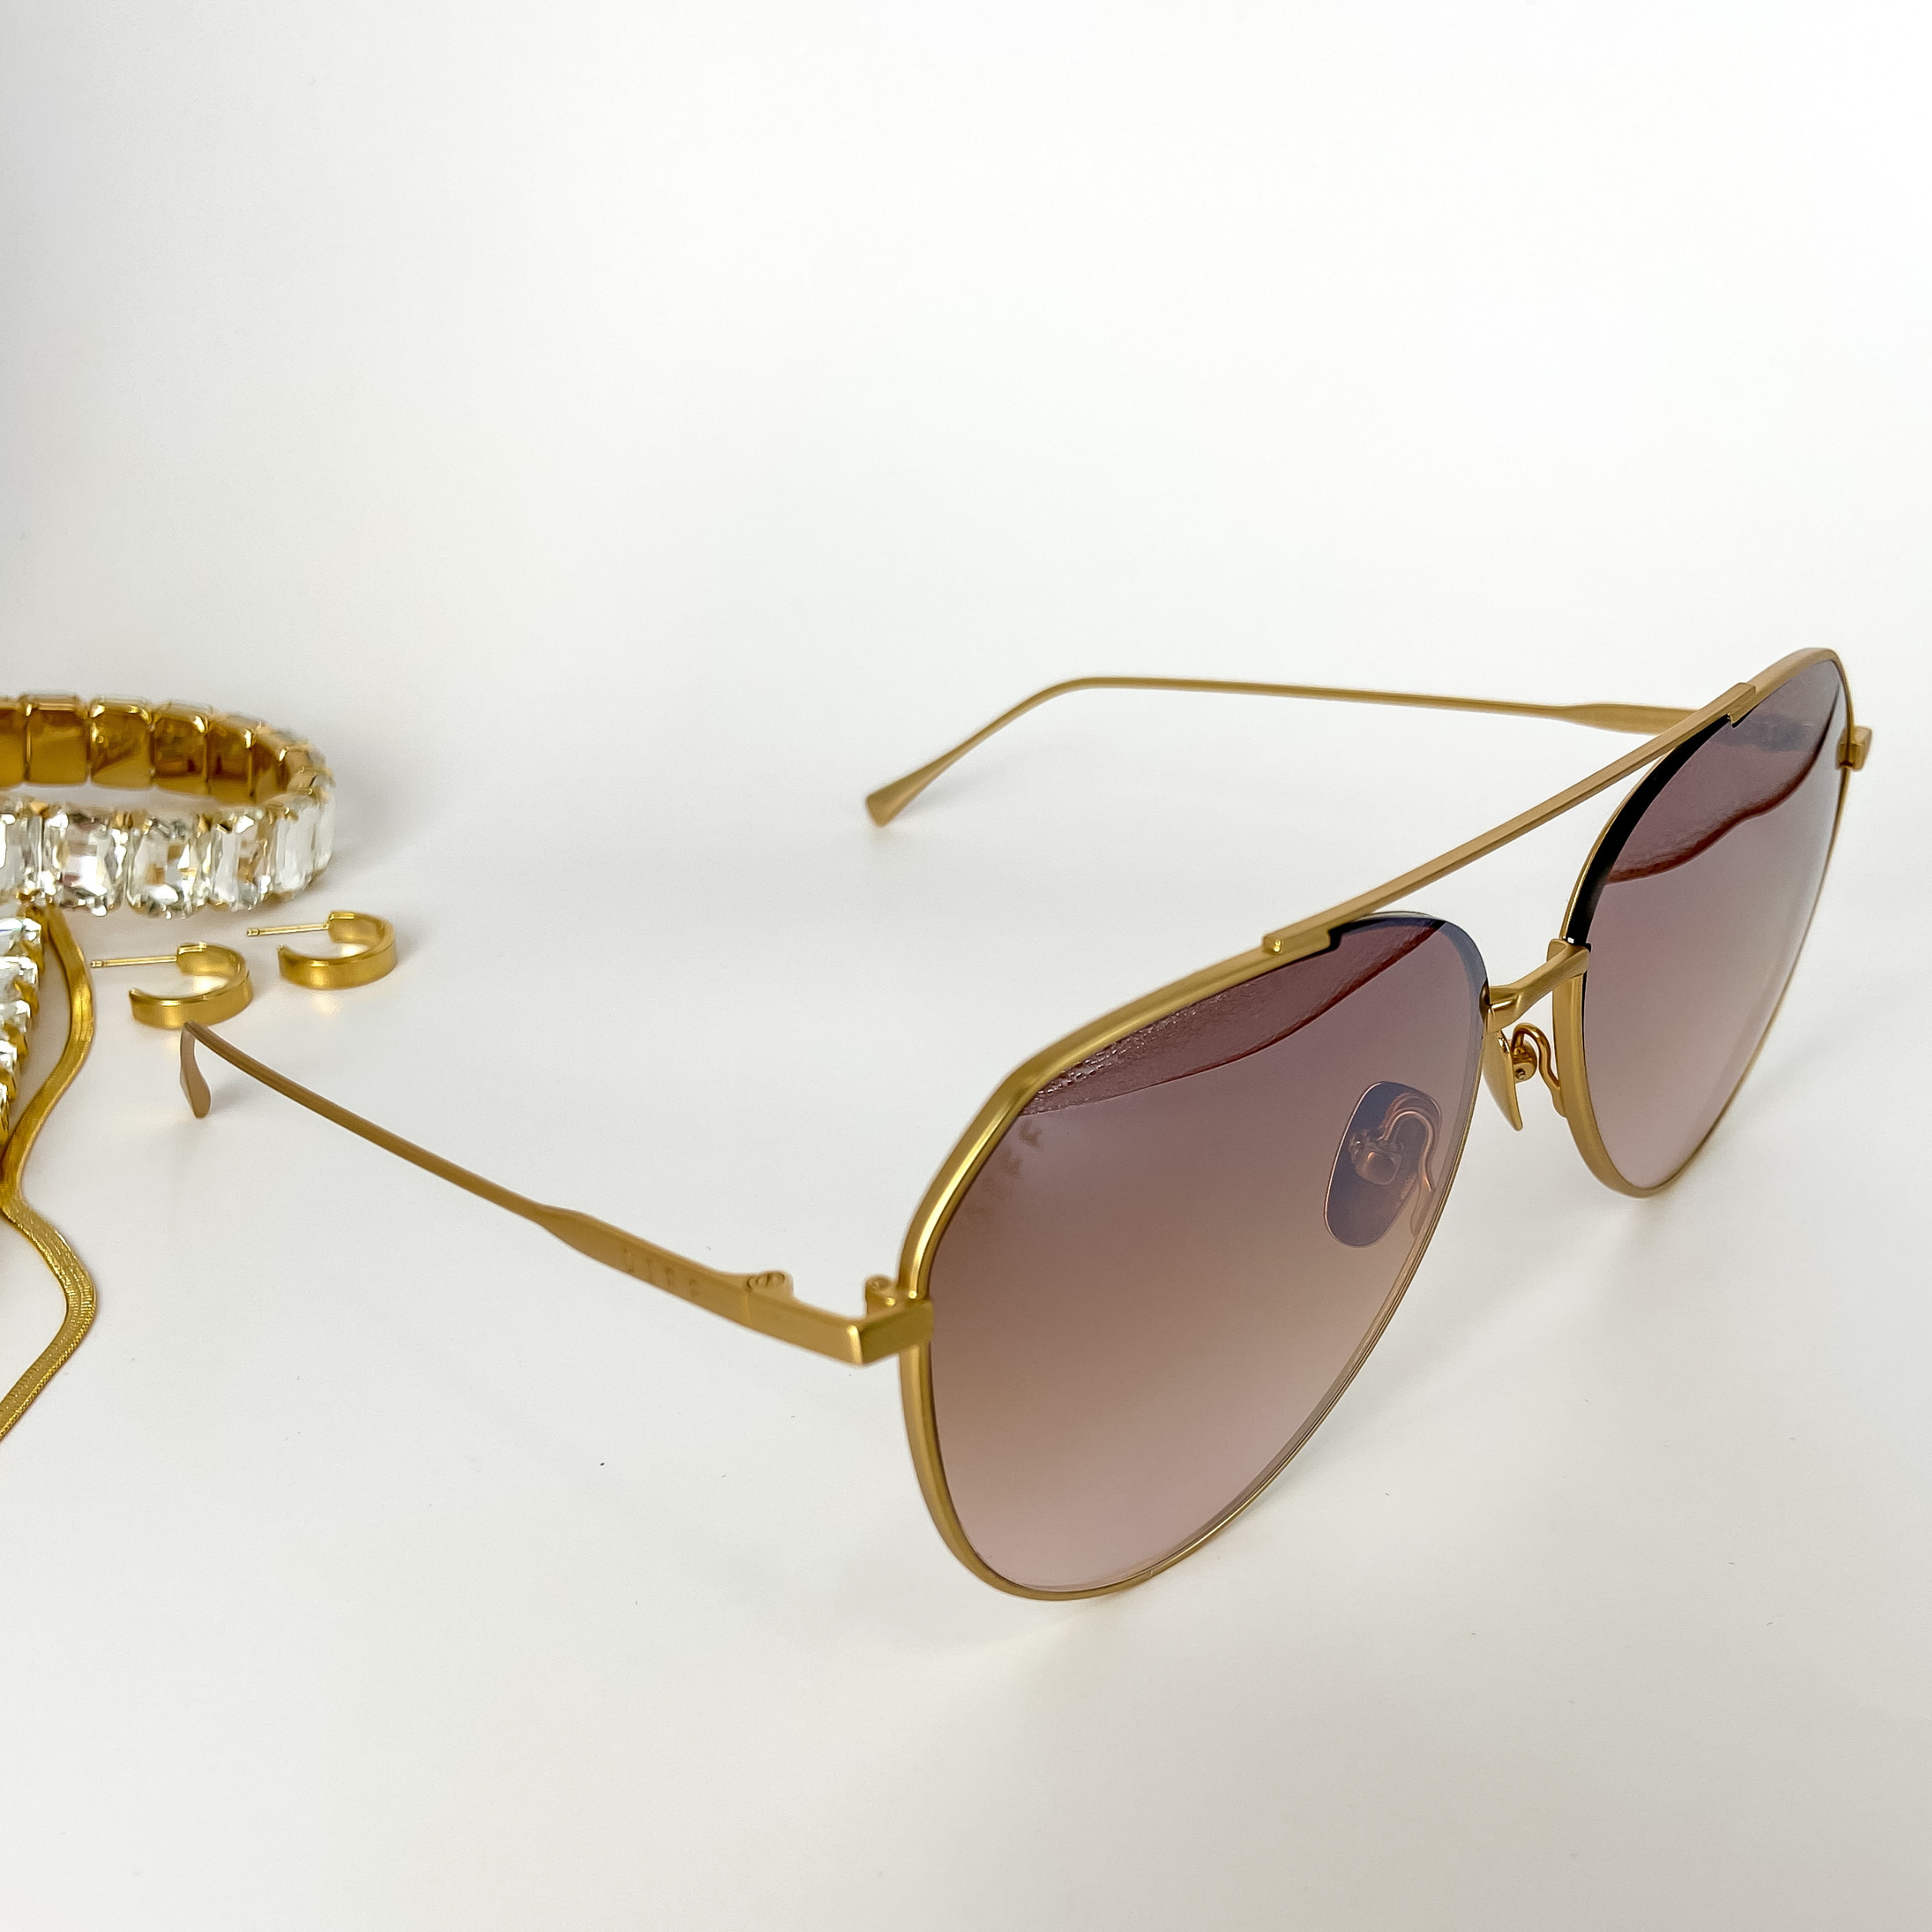 A pair of gold tone aviator sunglasses with taupe mirror lenses. These sunglasses are pictured on a white background with gold jewelry.